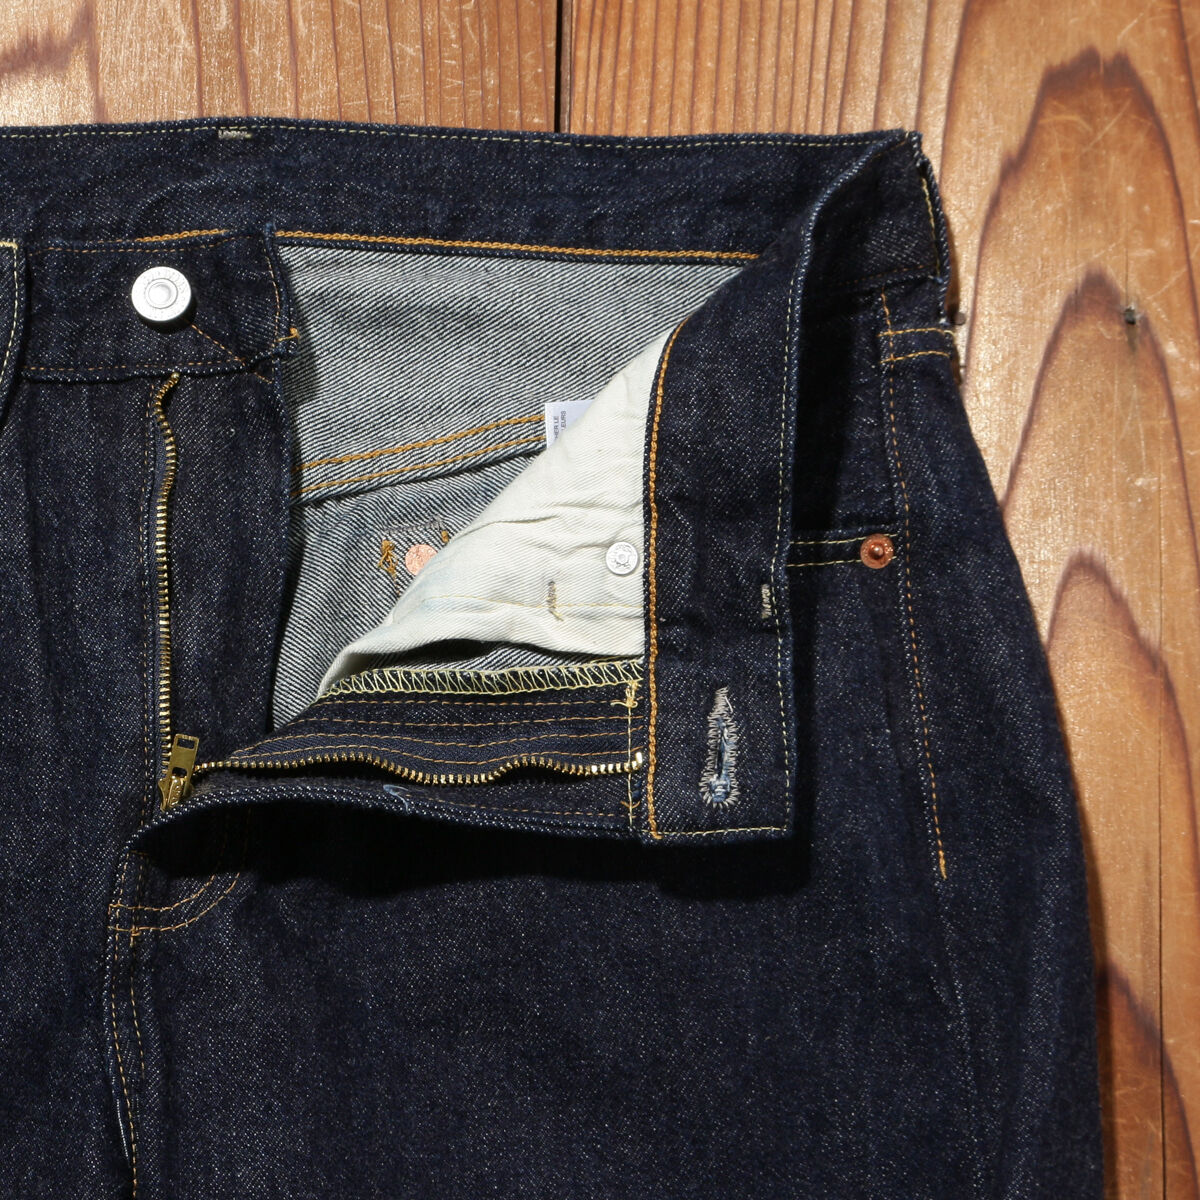 LEVI'S® VINTAGE CLOTHING1954モデル 501® JEANS NEW RINSE ...